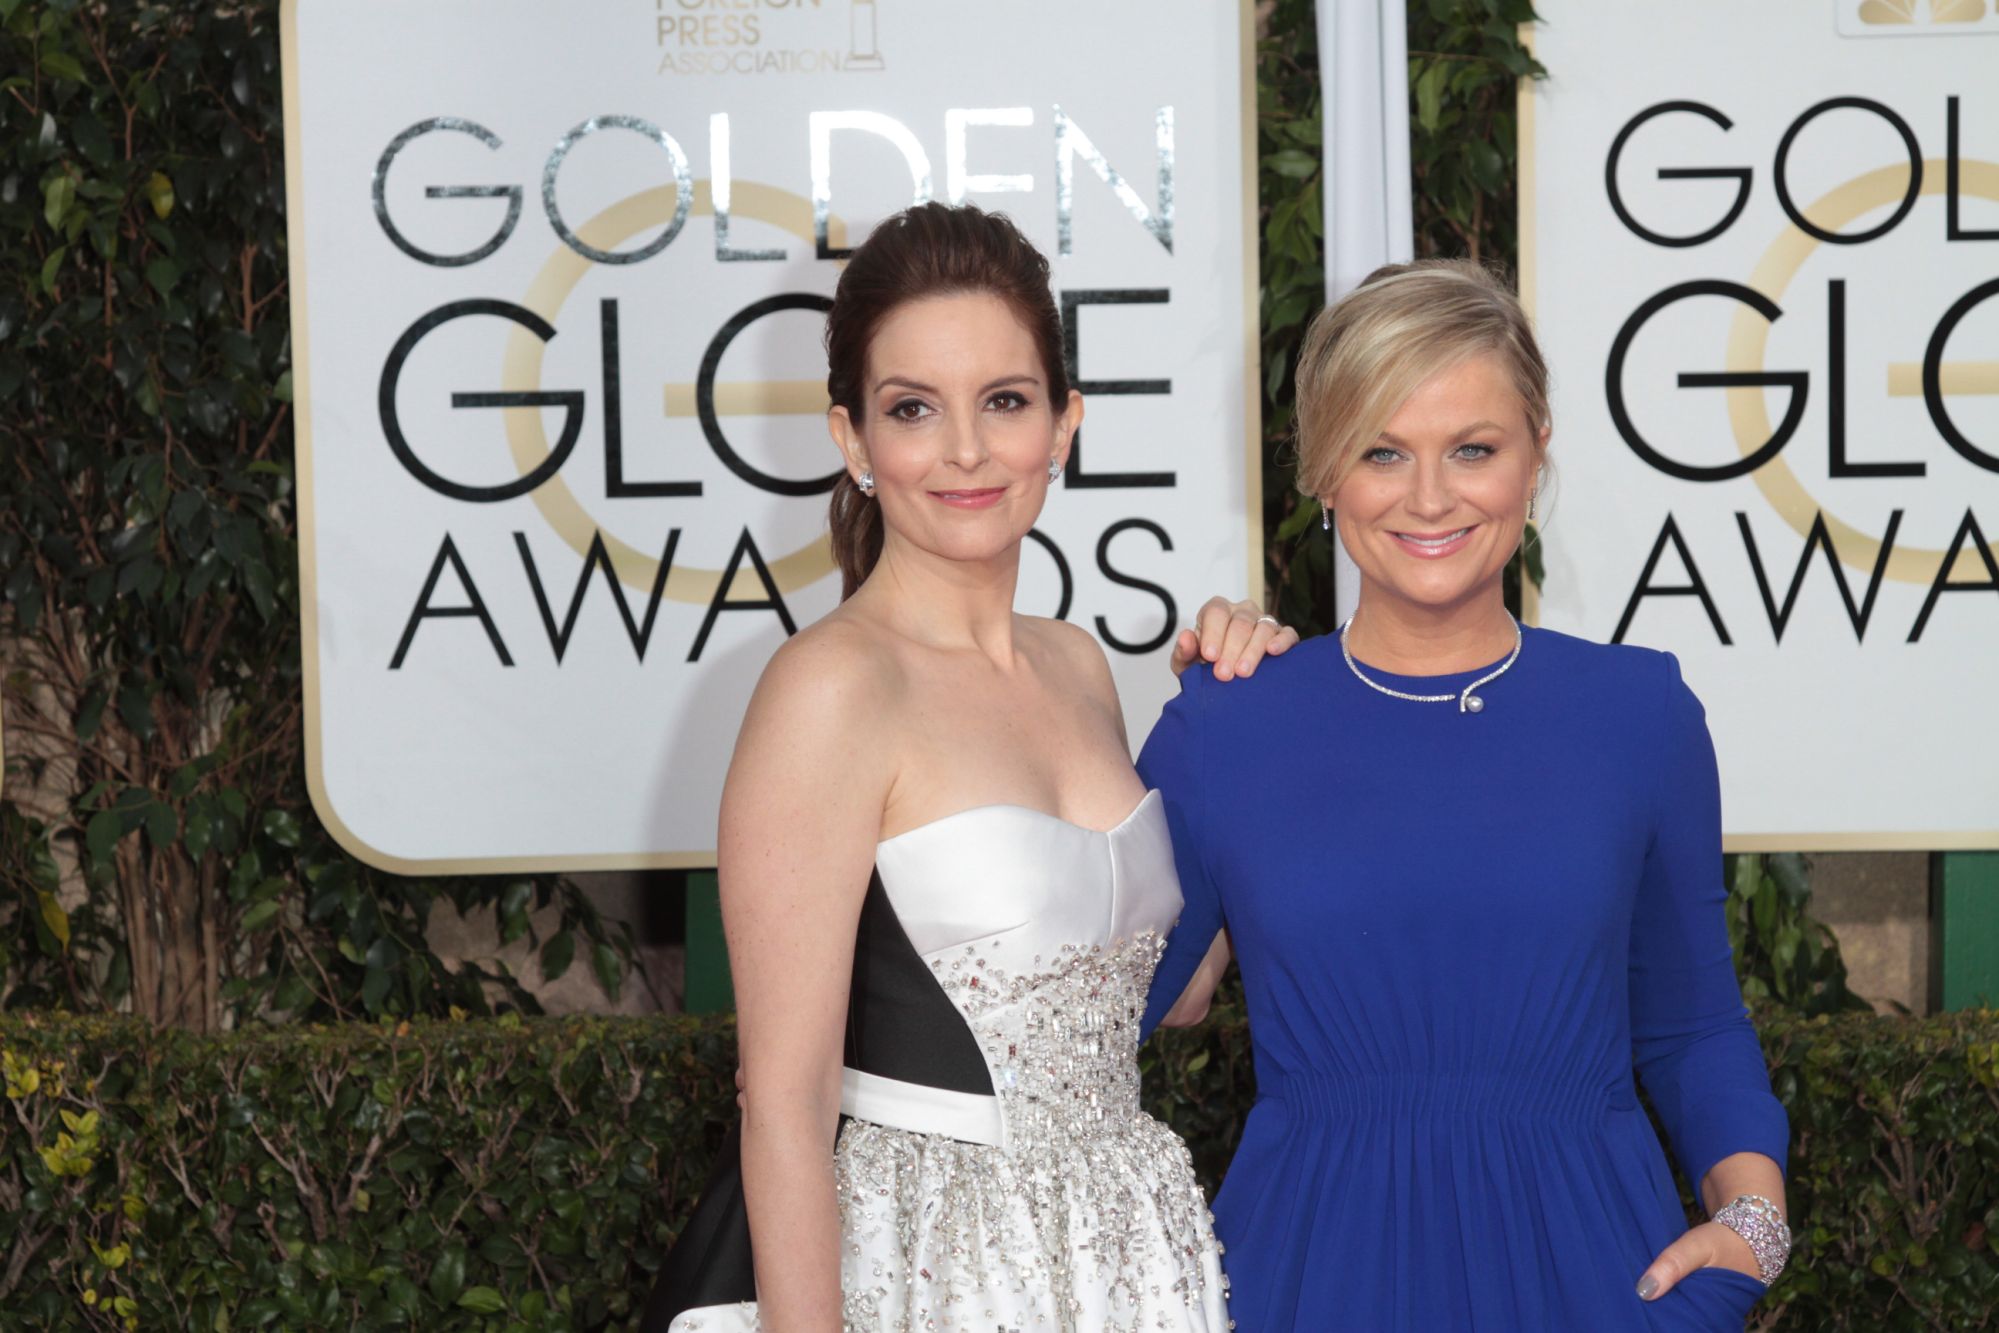 How to watch the Golden Globes 2021 in the UK